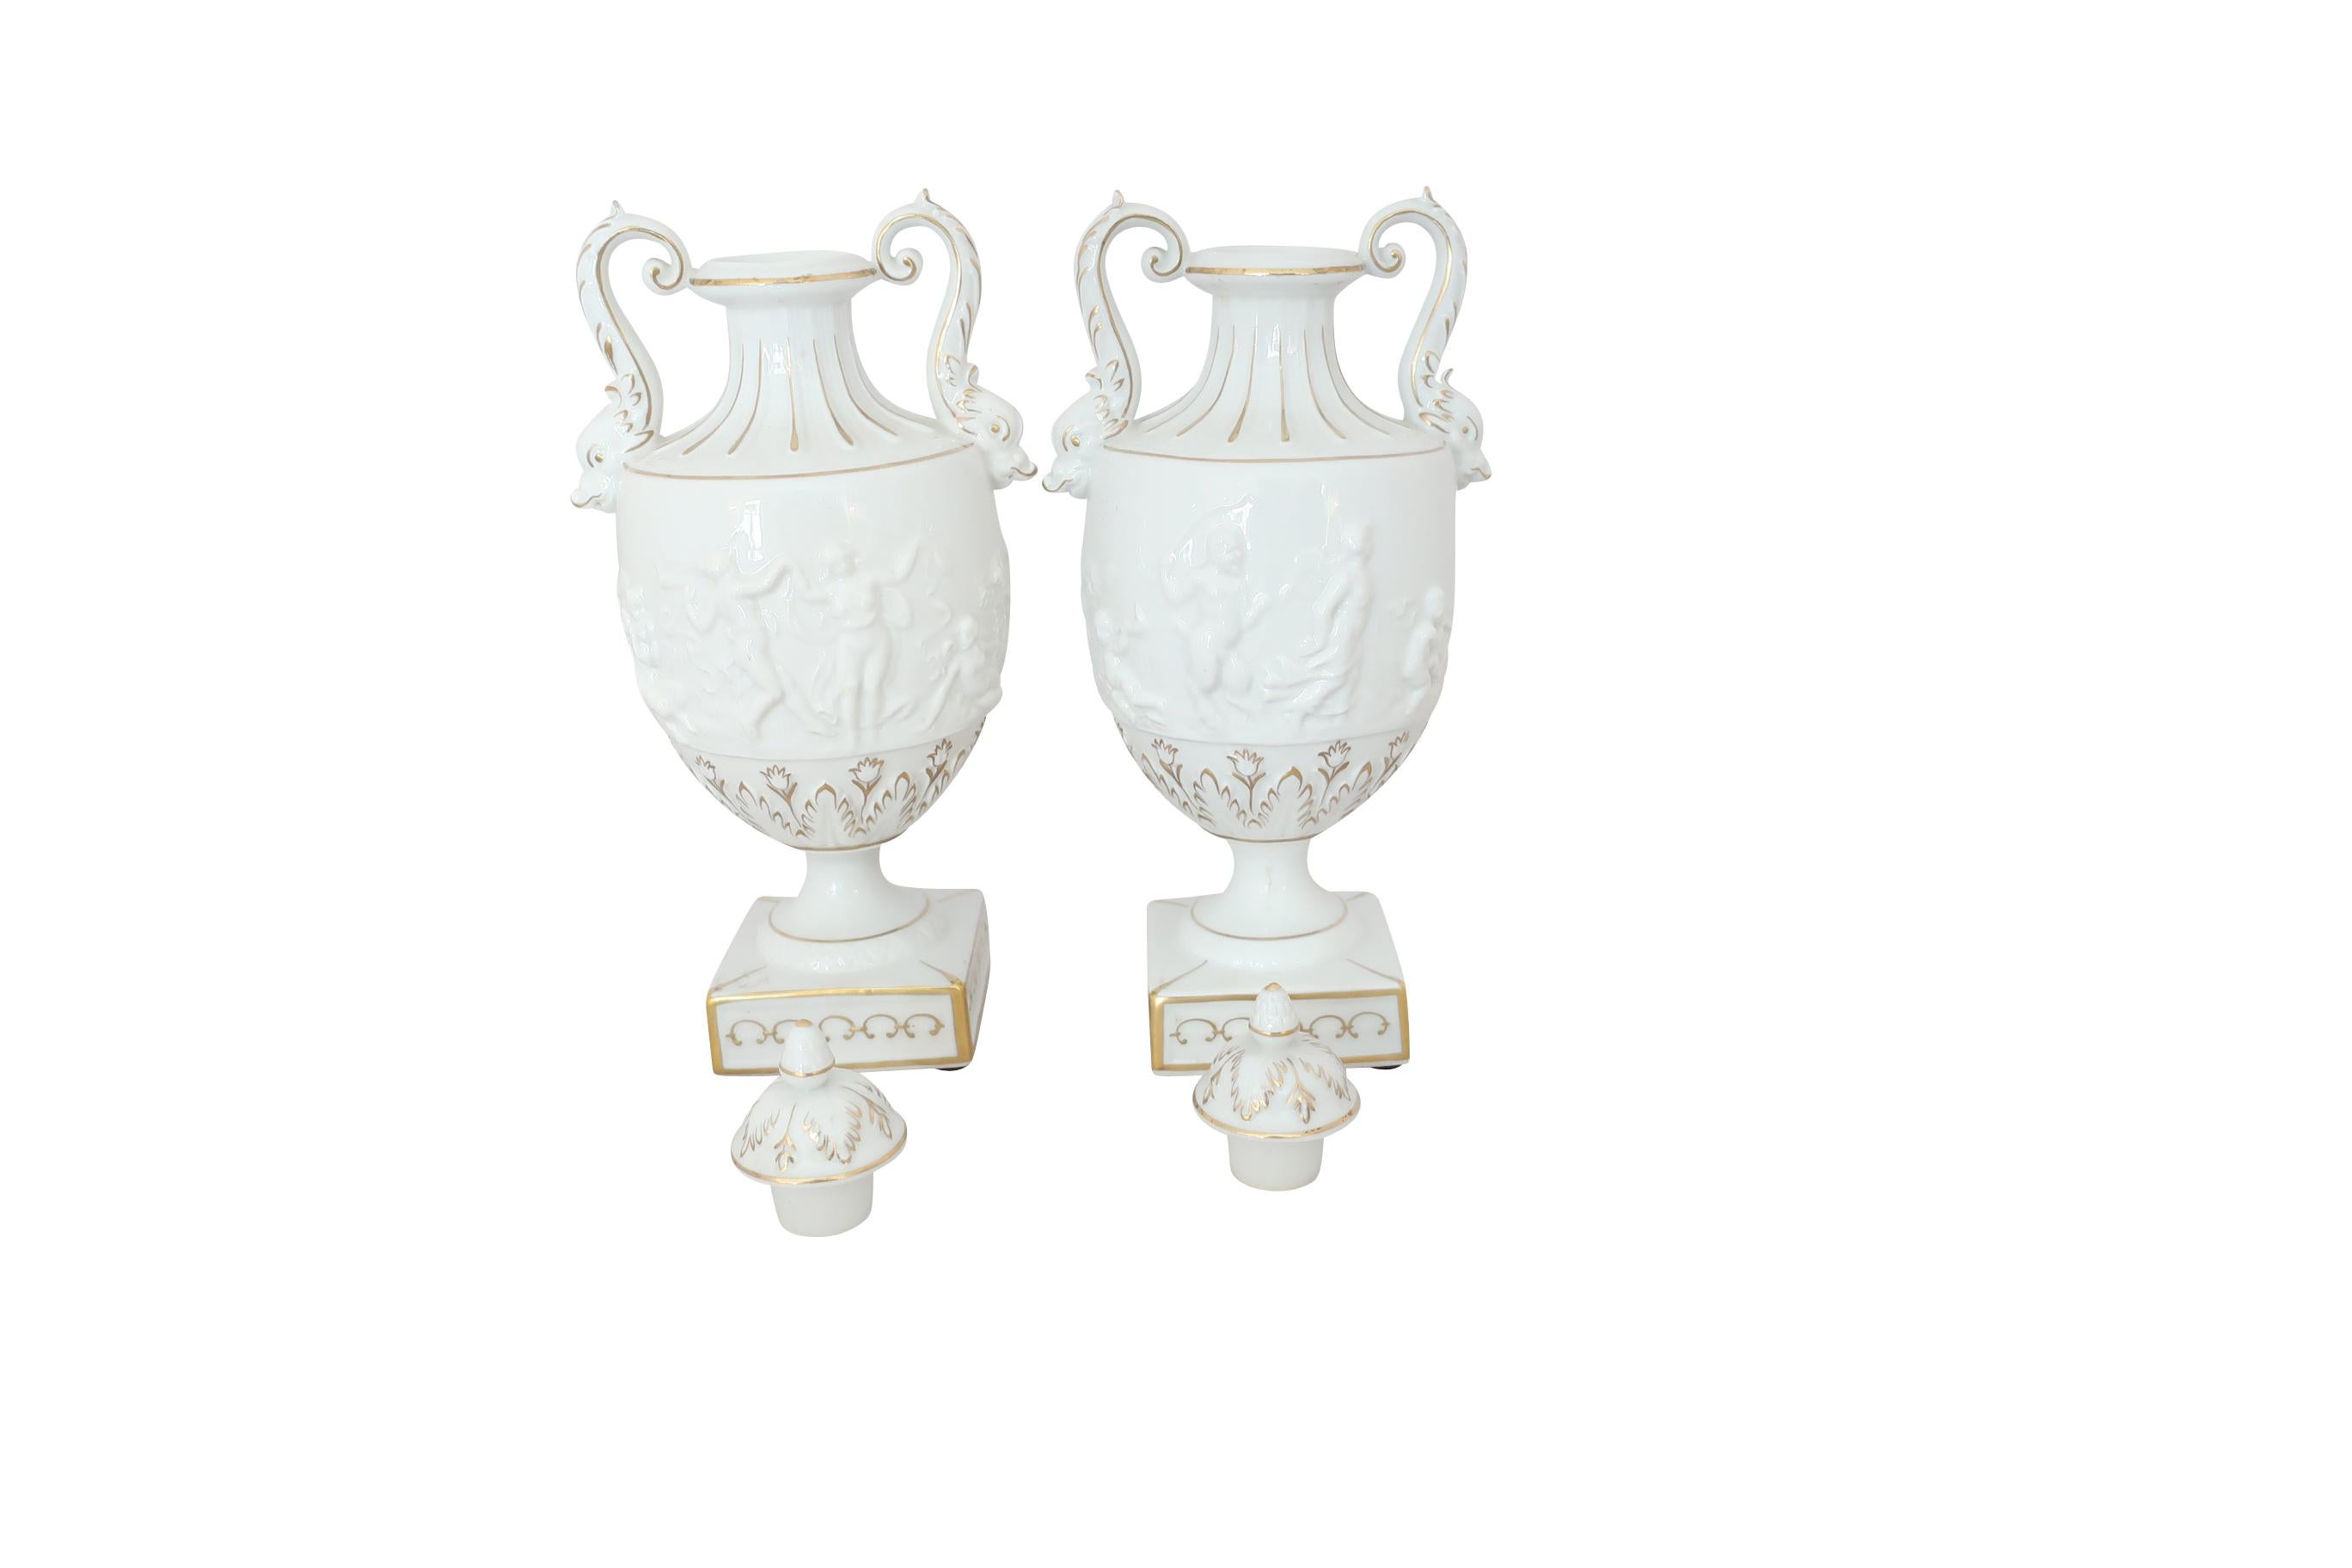 Hand-Painted White and Gilt Capodimonte Porcelain Urns with Lids and Putti Decoration For Sale